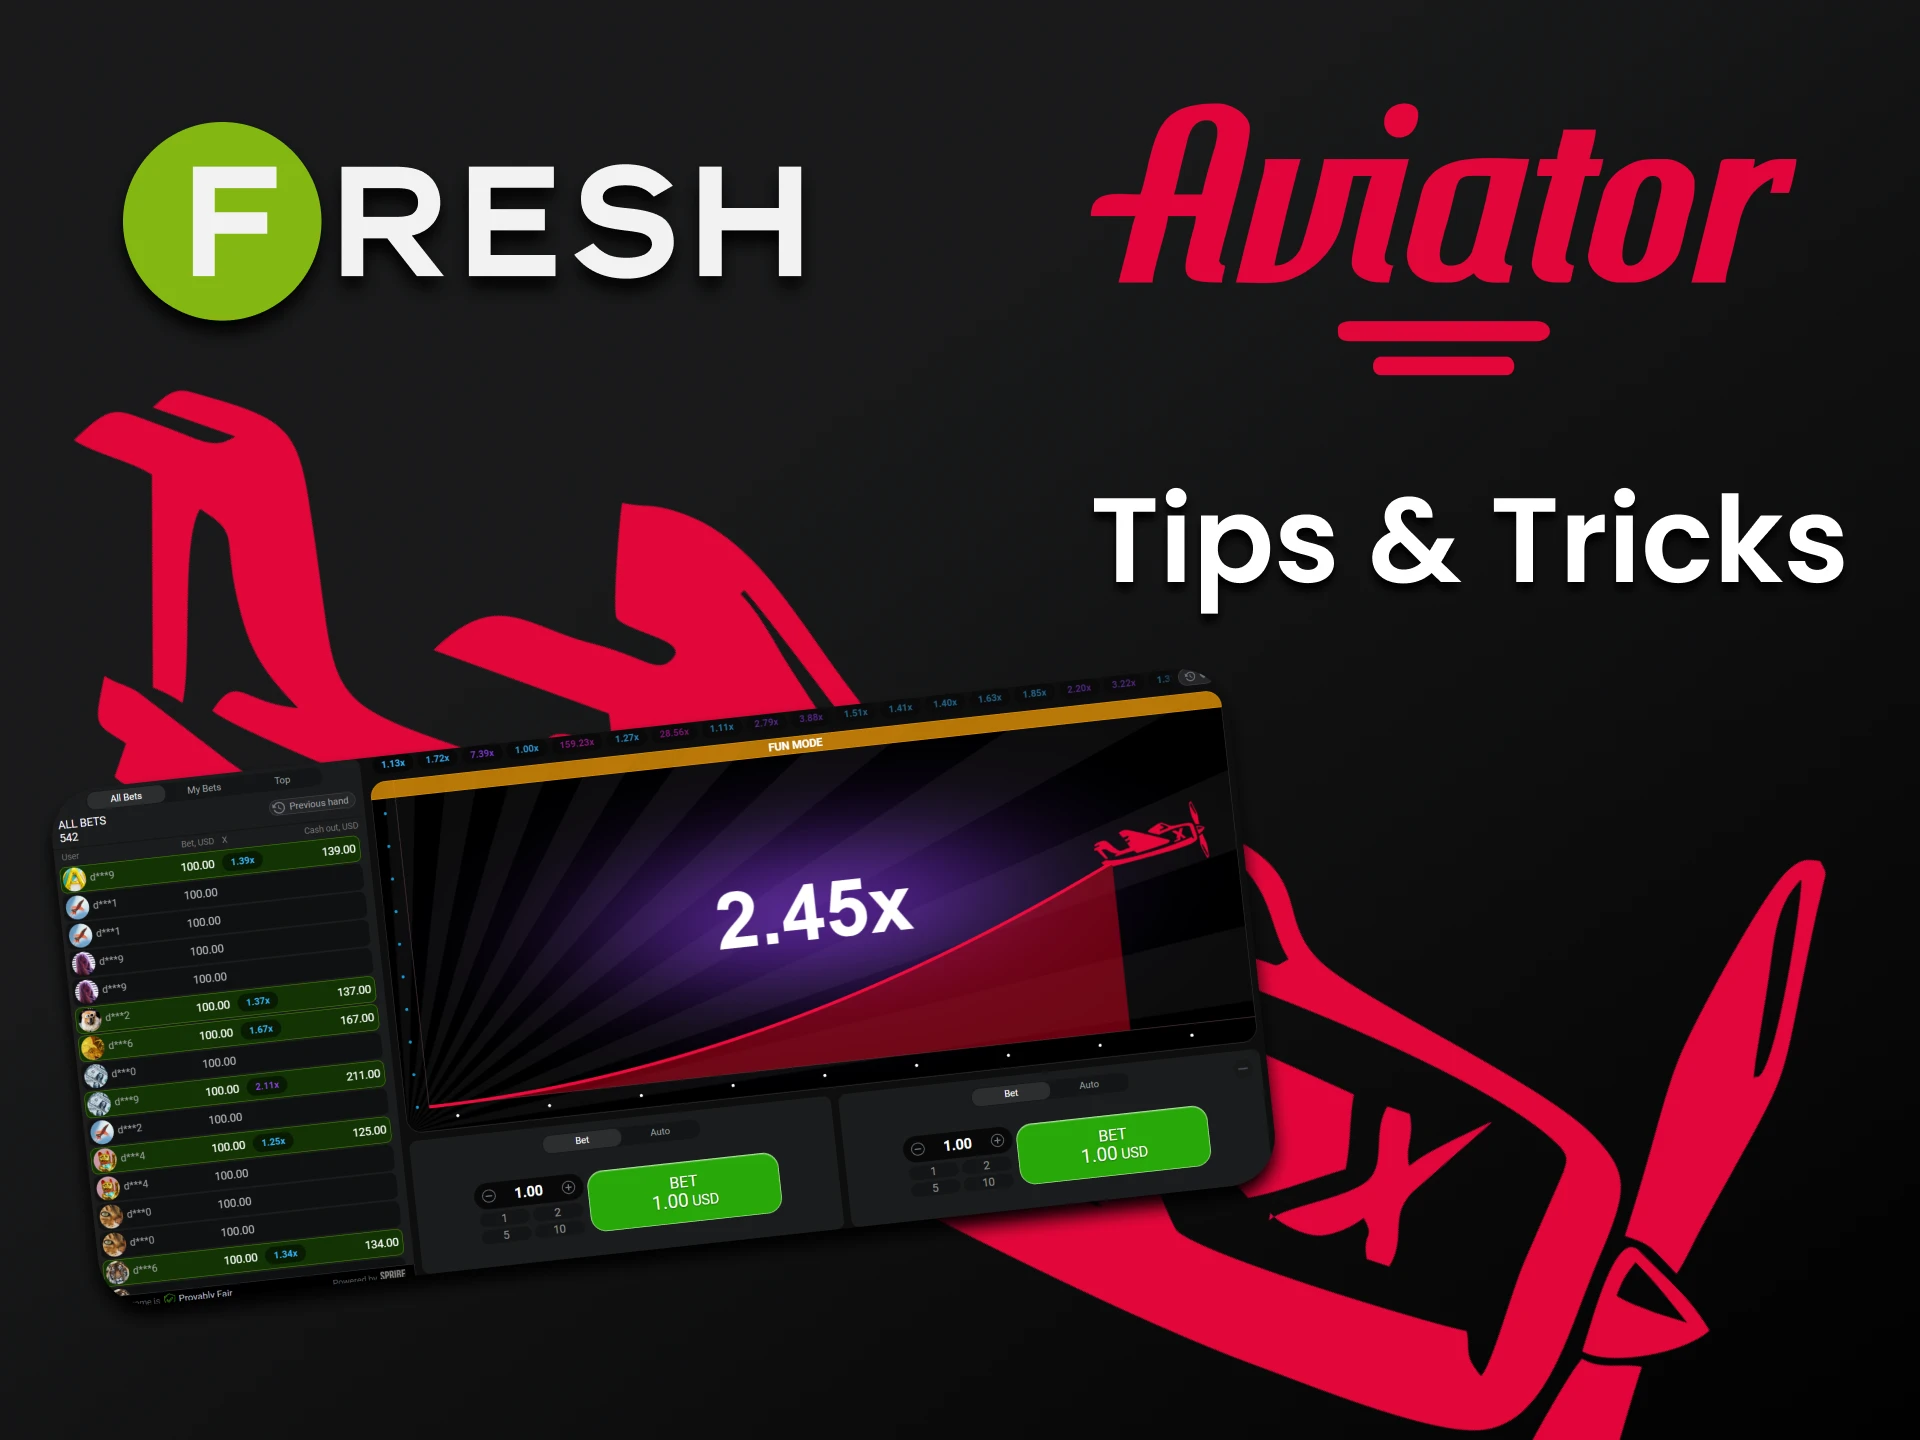 Learn tips and tricks for Aviator at Fresh Casino.